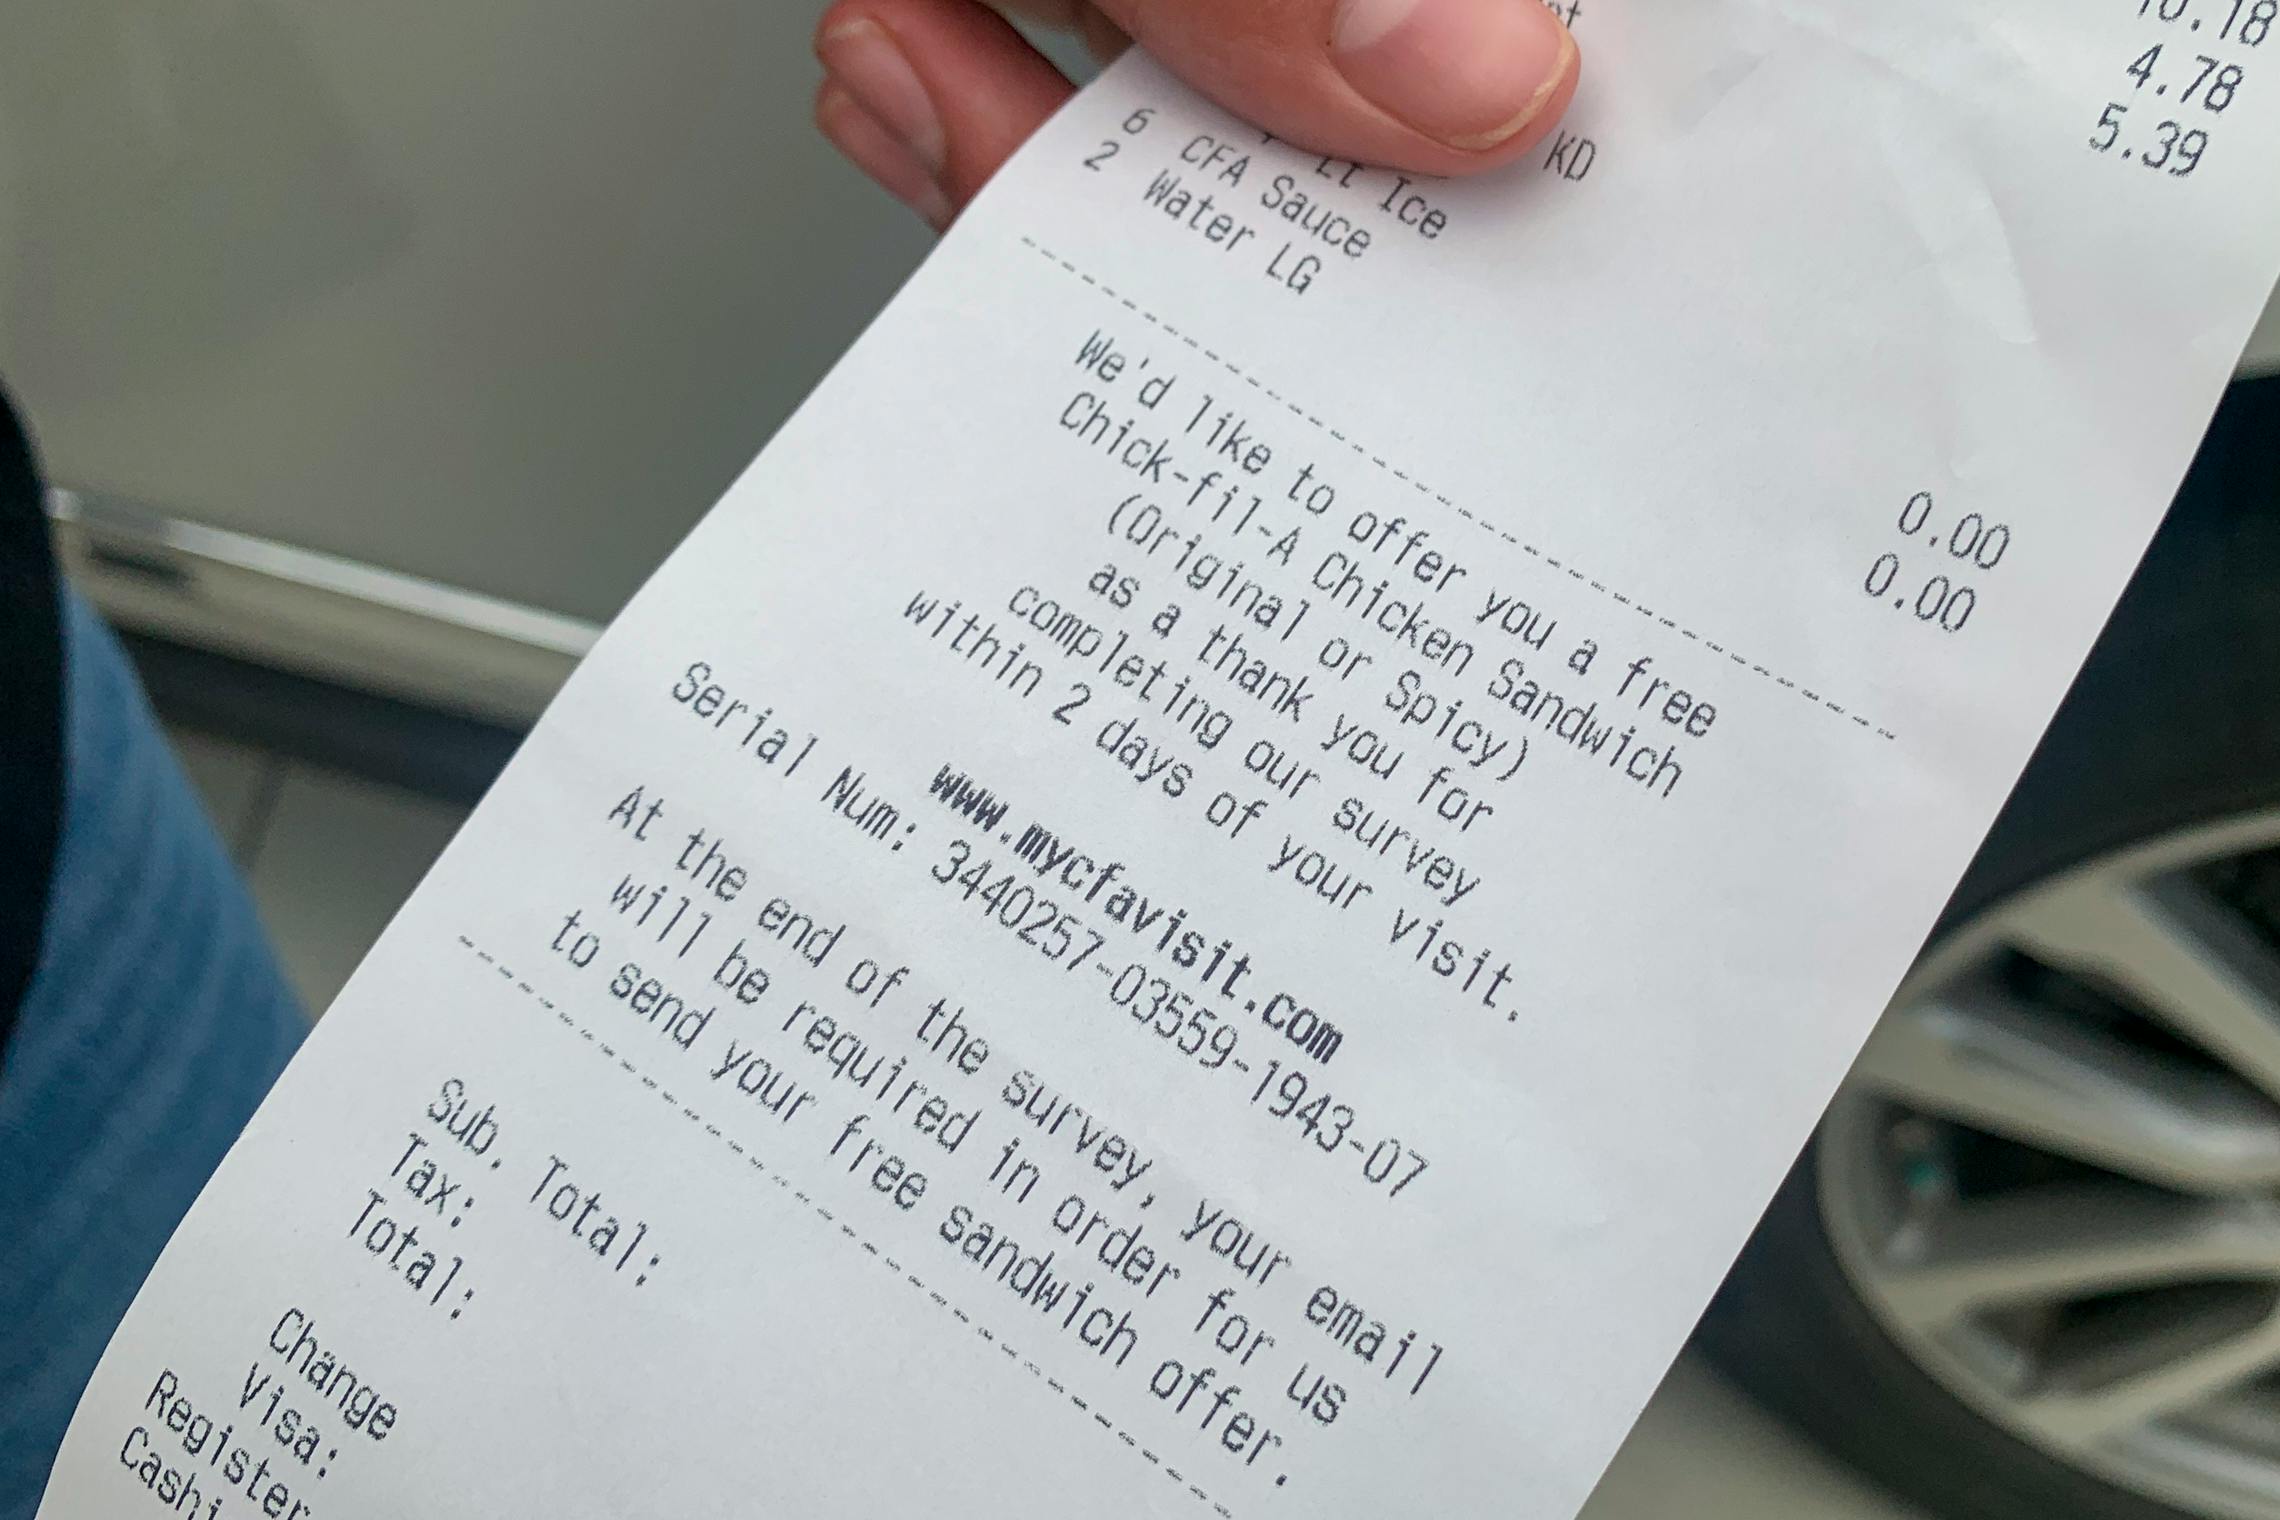 A person's hand holding a Chick-fil-A receipt showing an offer of a free chicken sandwich for completing the survey.